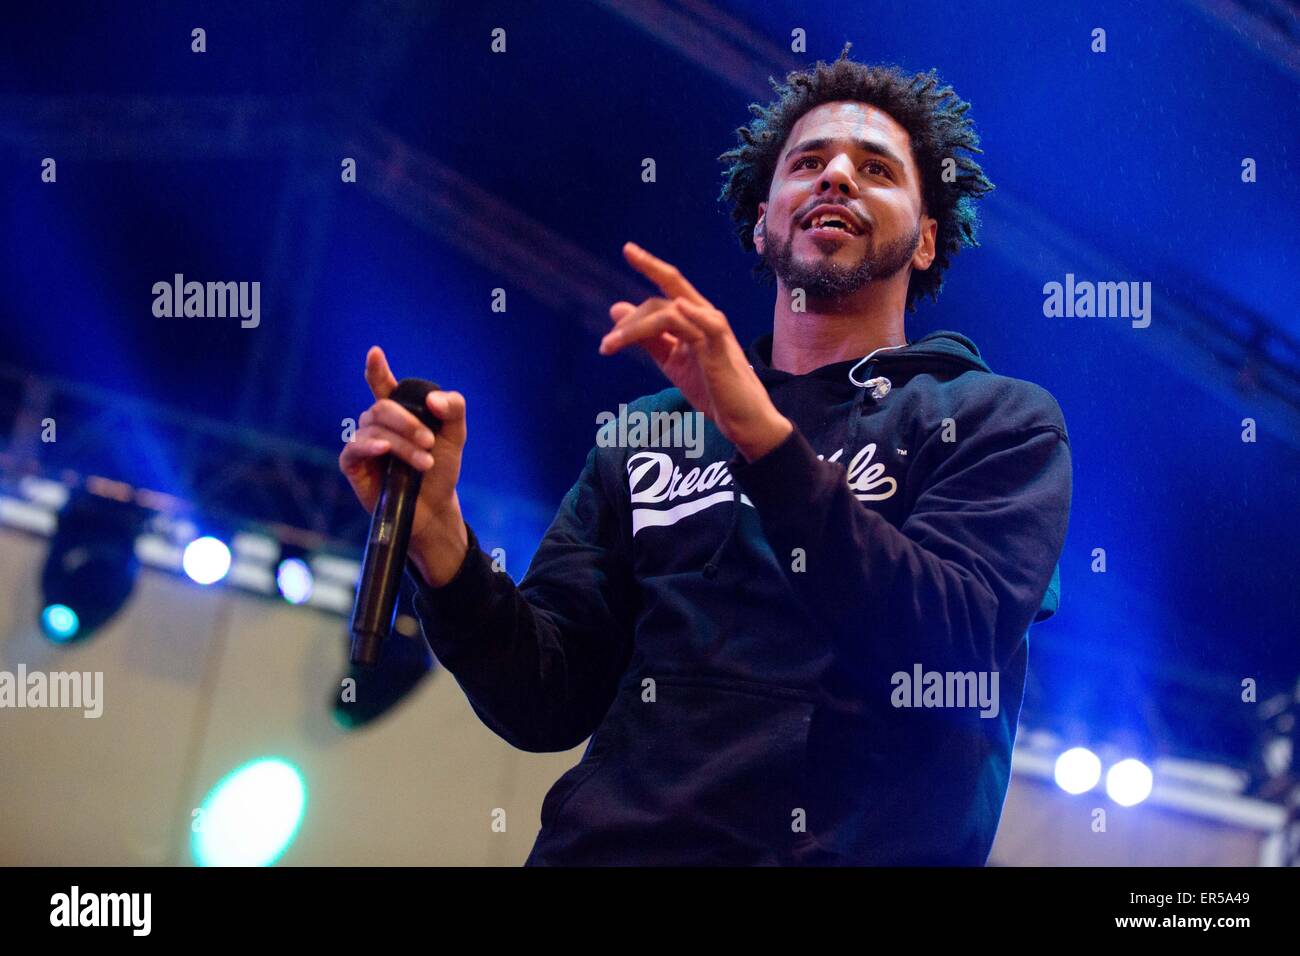 Shakopee, Minnesota, USA. 24th May, 2015. Singer J. COLE performs live on stage at the Soundset music festival at Canterbury Park in Shankopee, Minnesota © Daniel DeSlover/ZUMA Wire/Alamy Live News Stock Photo